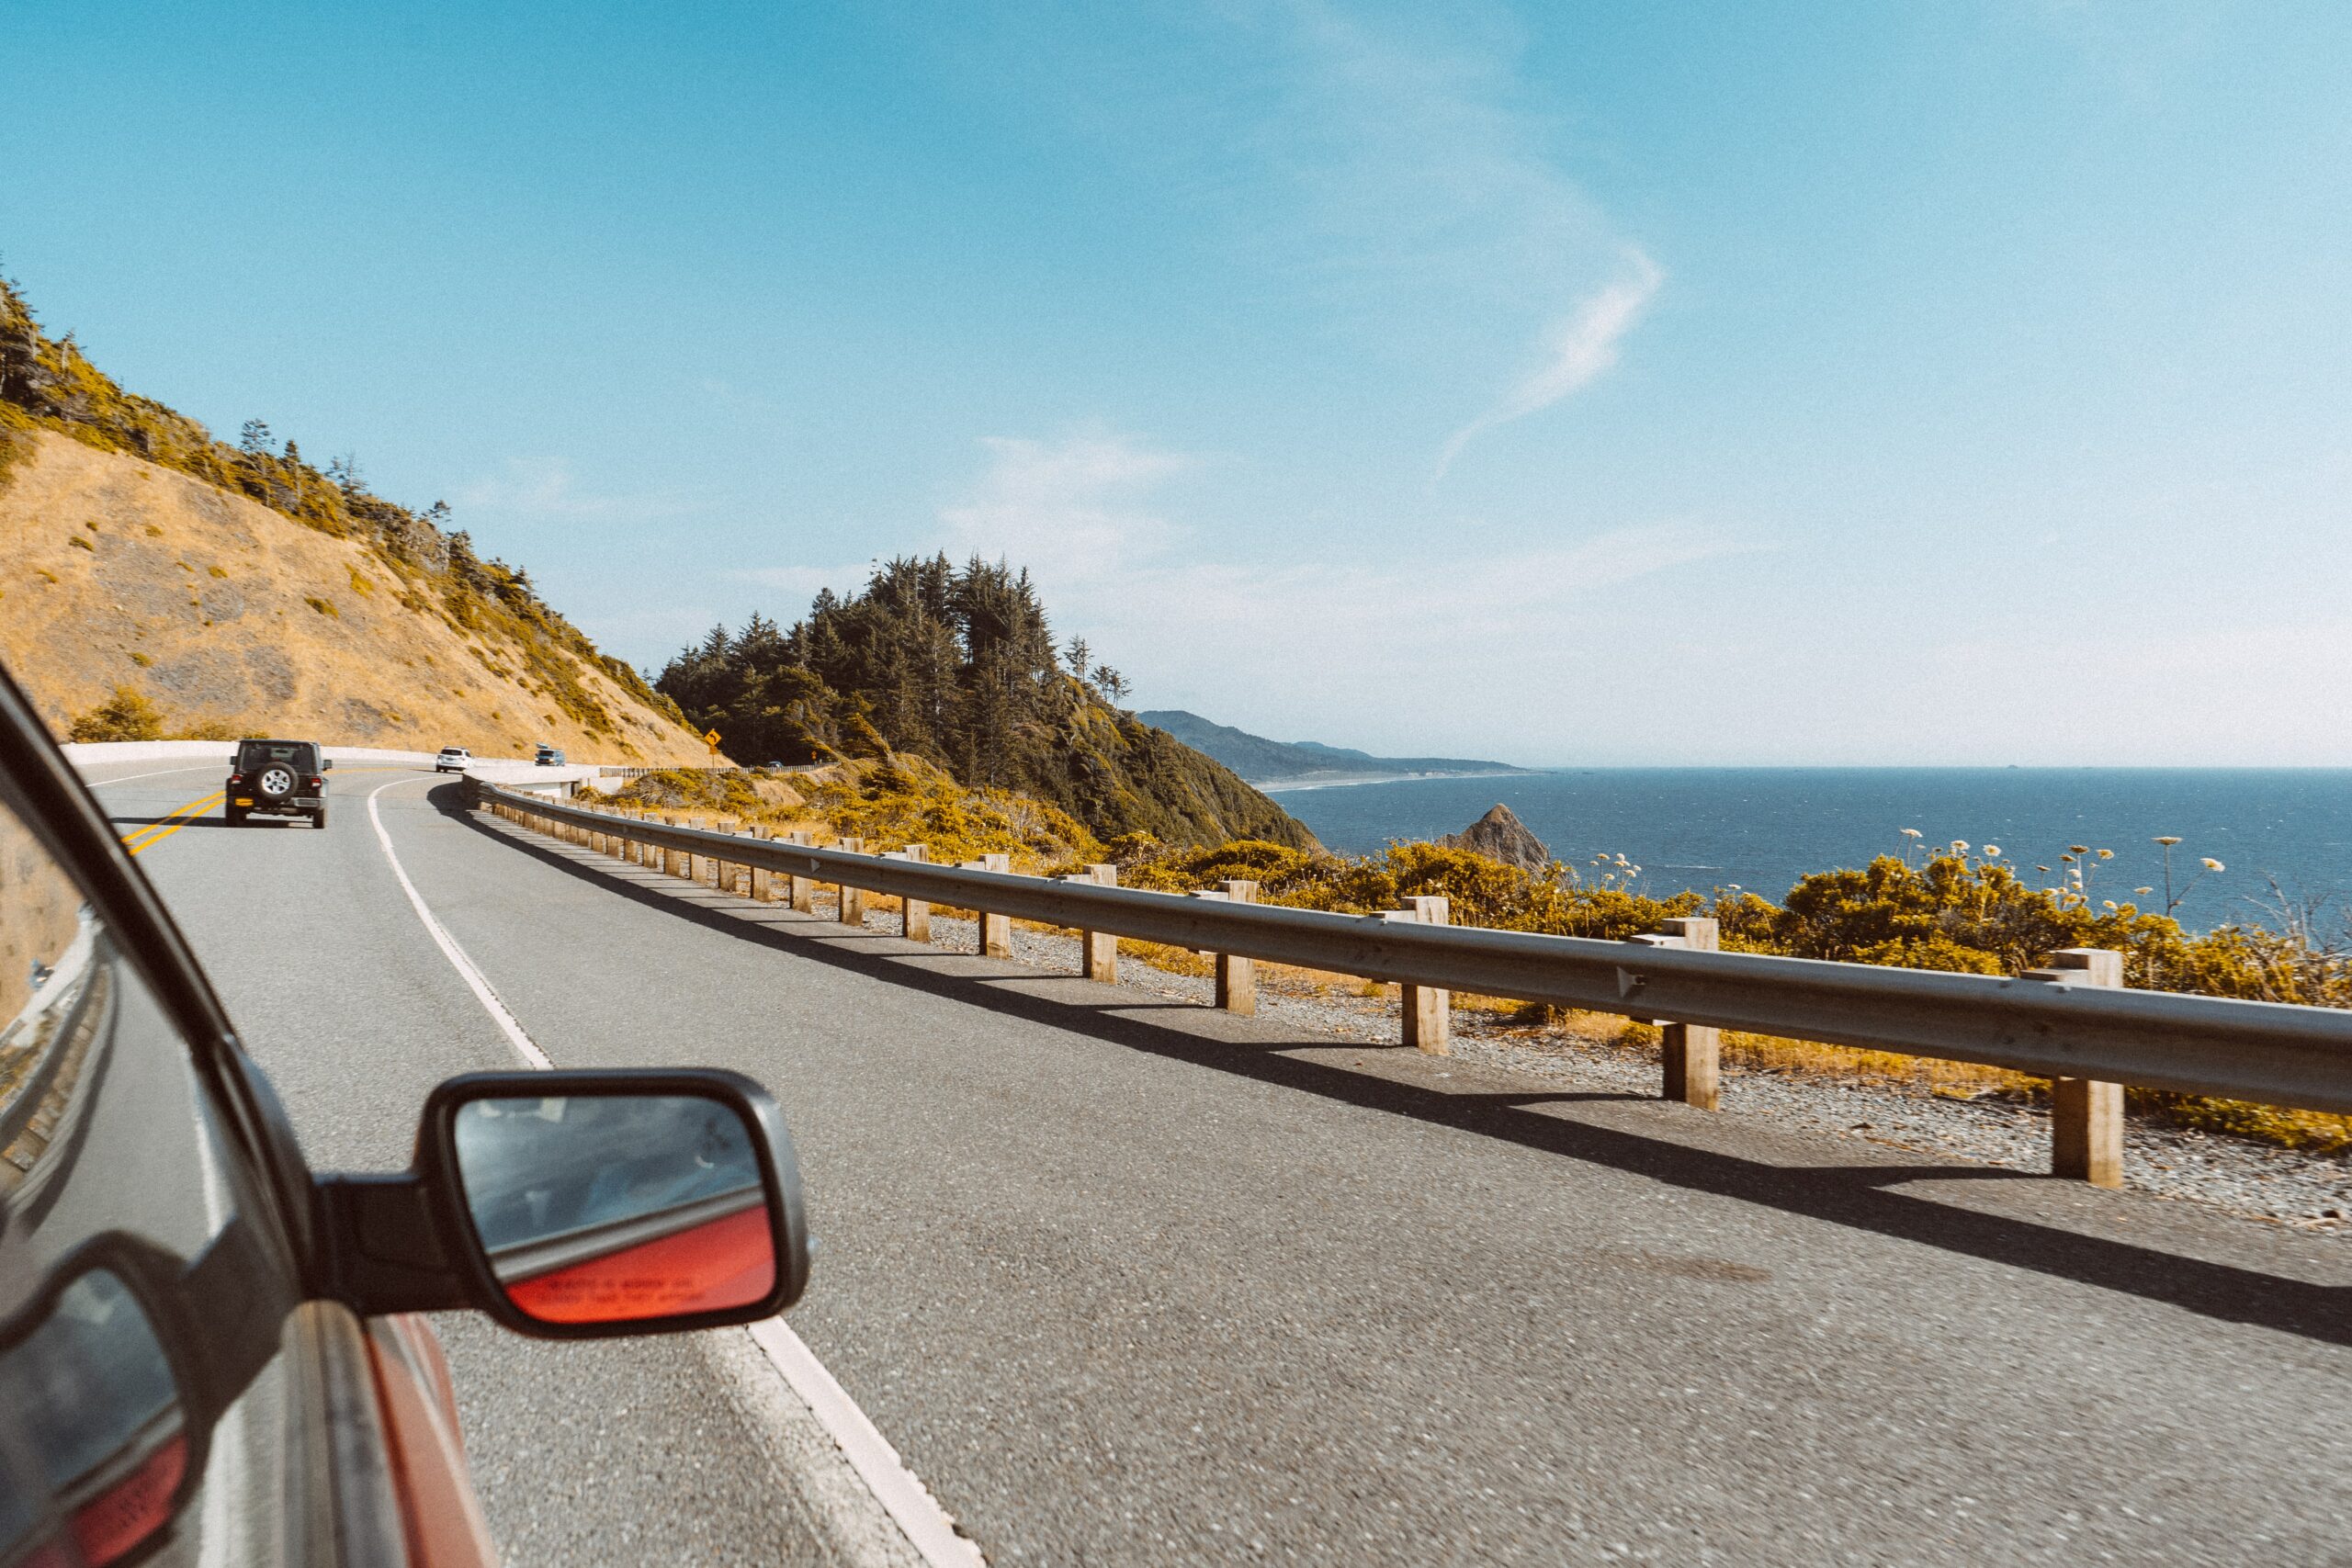 Road Trip Tips for Safely Getting to and from Your Destination